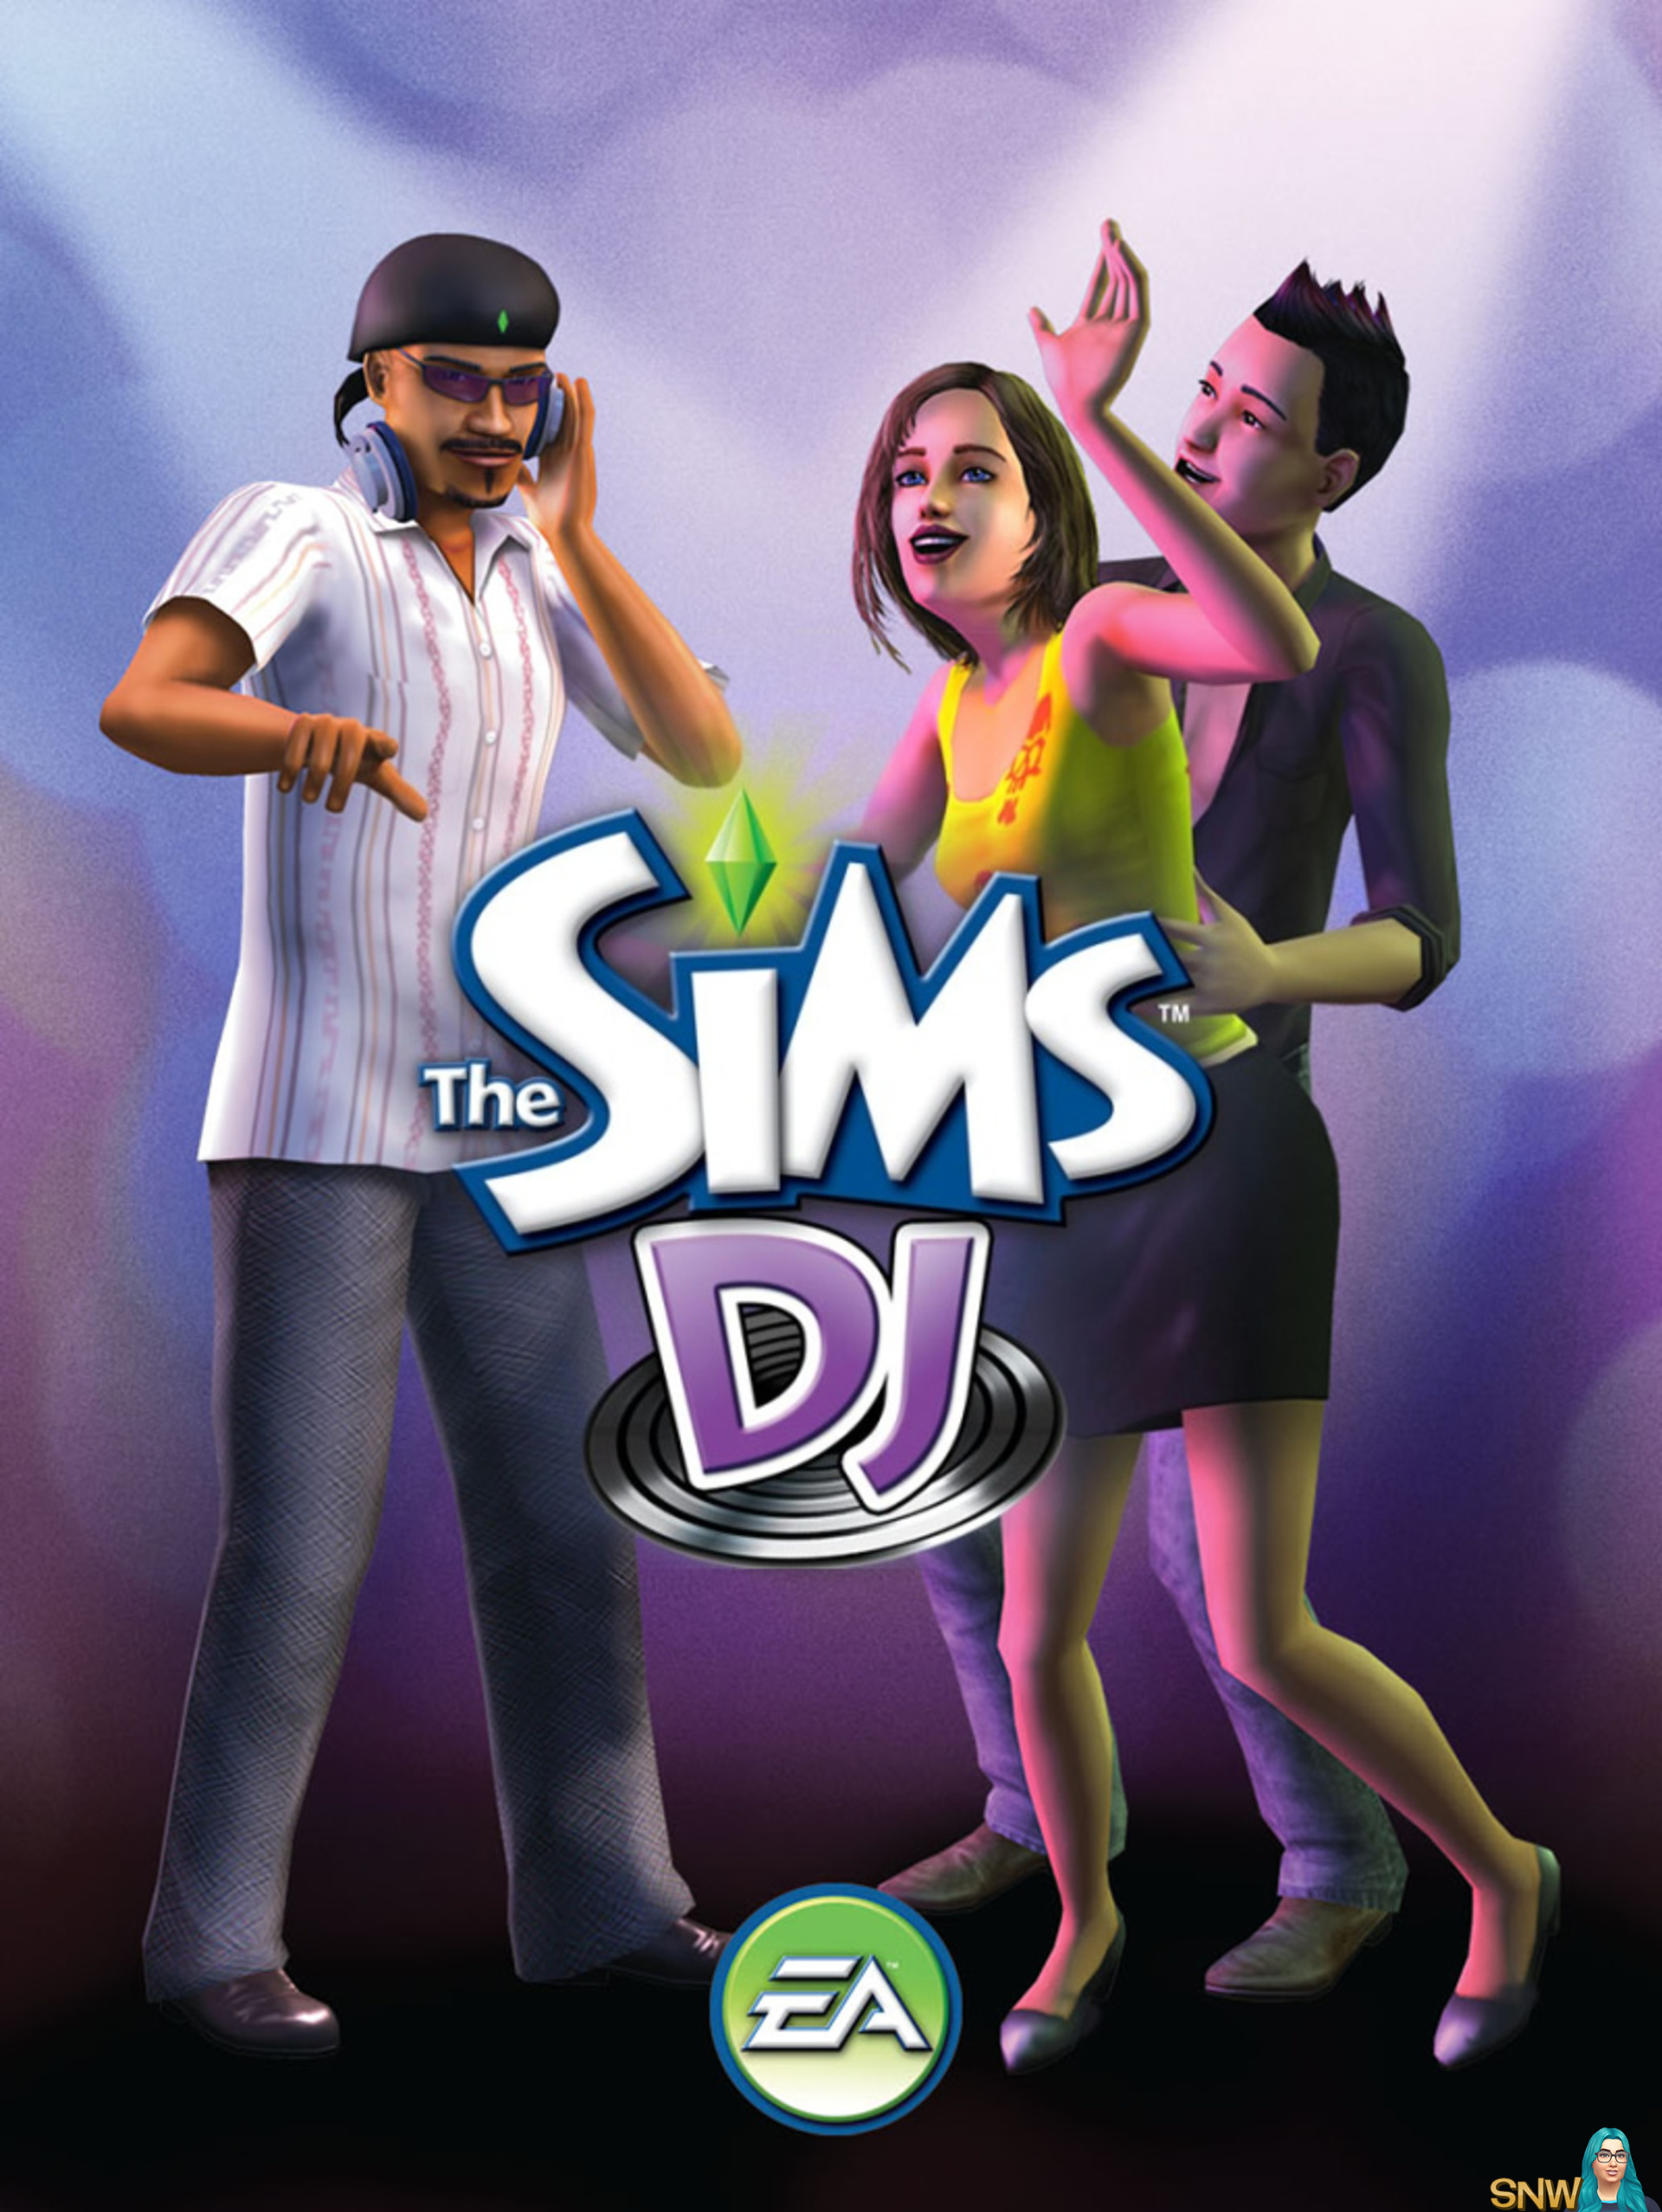 sims 3 complete collection download mr dj